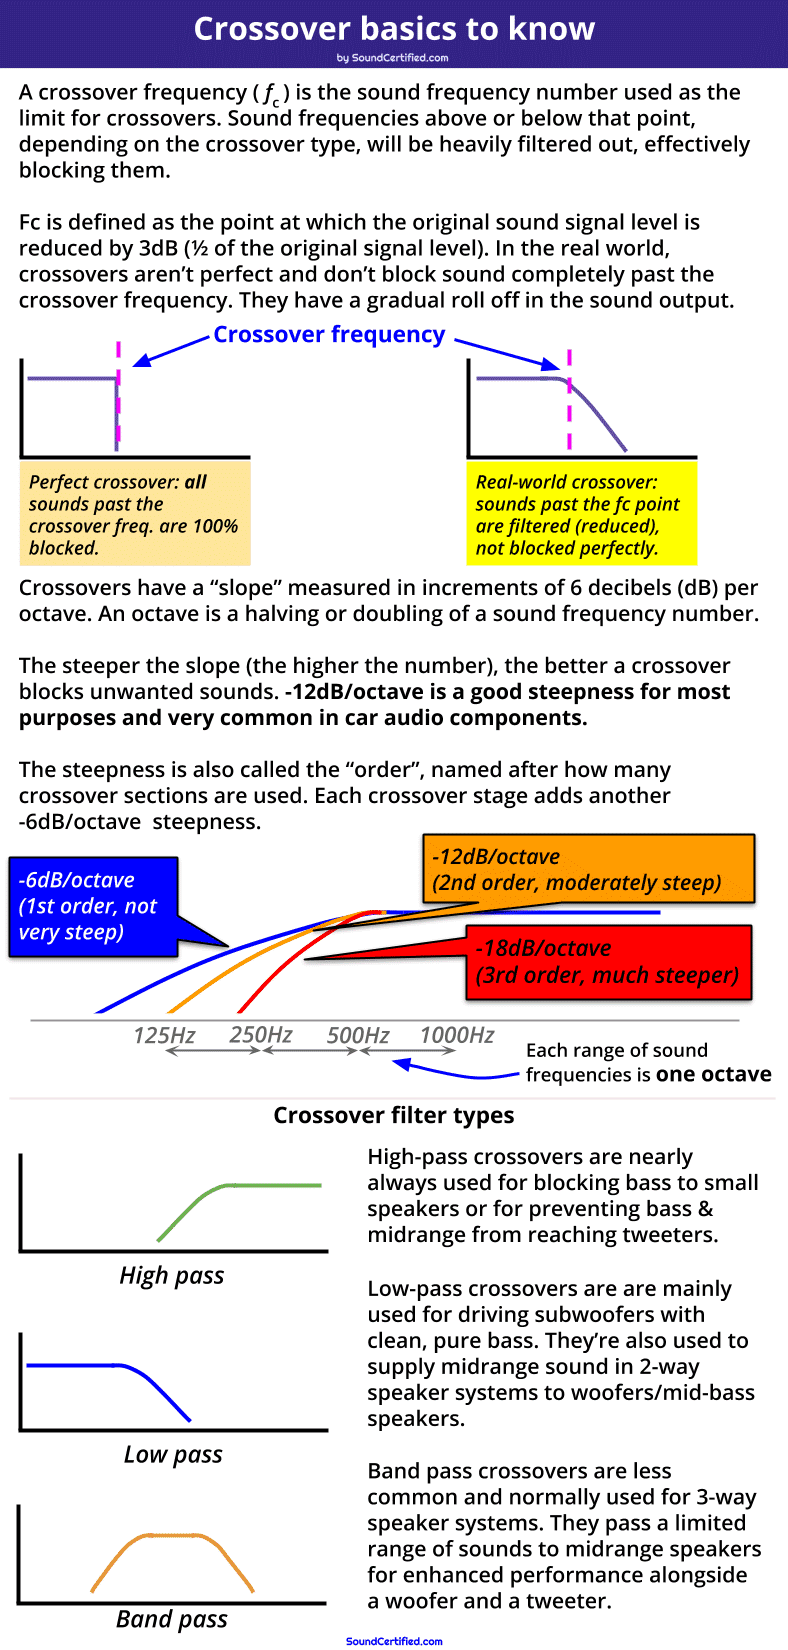 Crossovers and crossover frequencies explained diagram